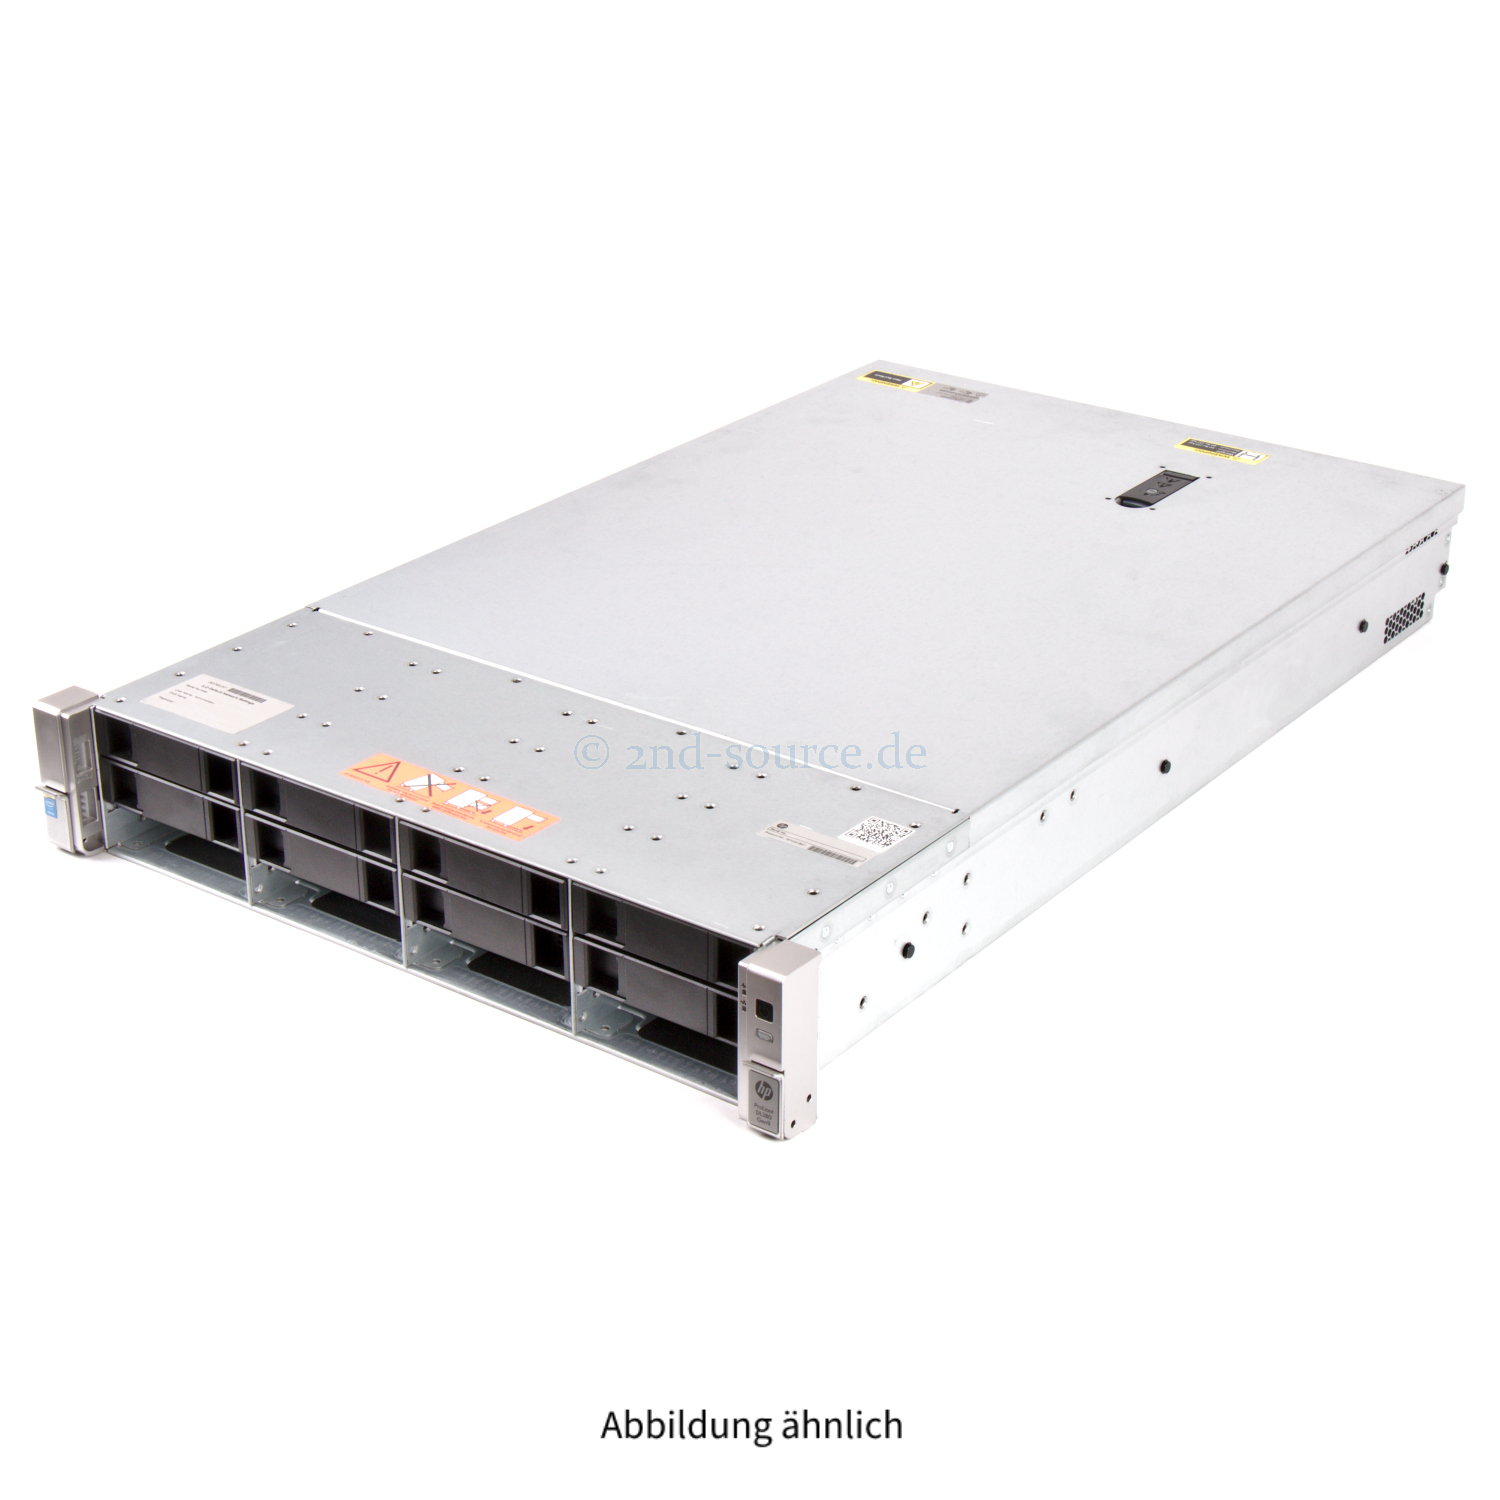 HPE DL380 G9 4x LFF CTO Chassis 767033-B21 P02757-001